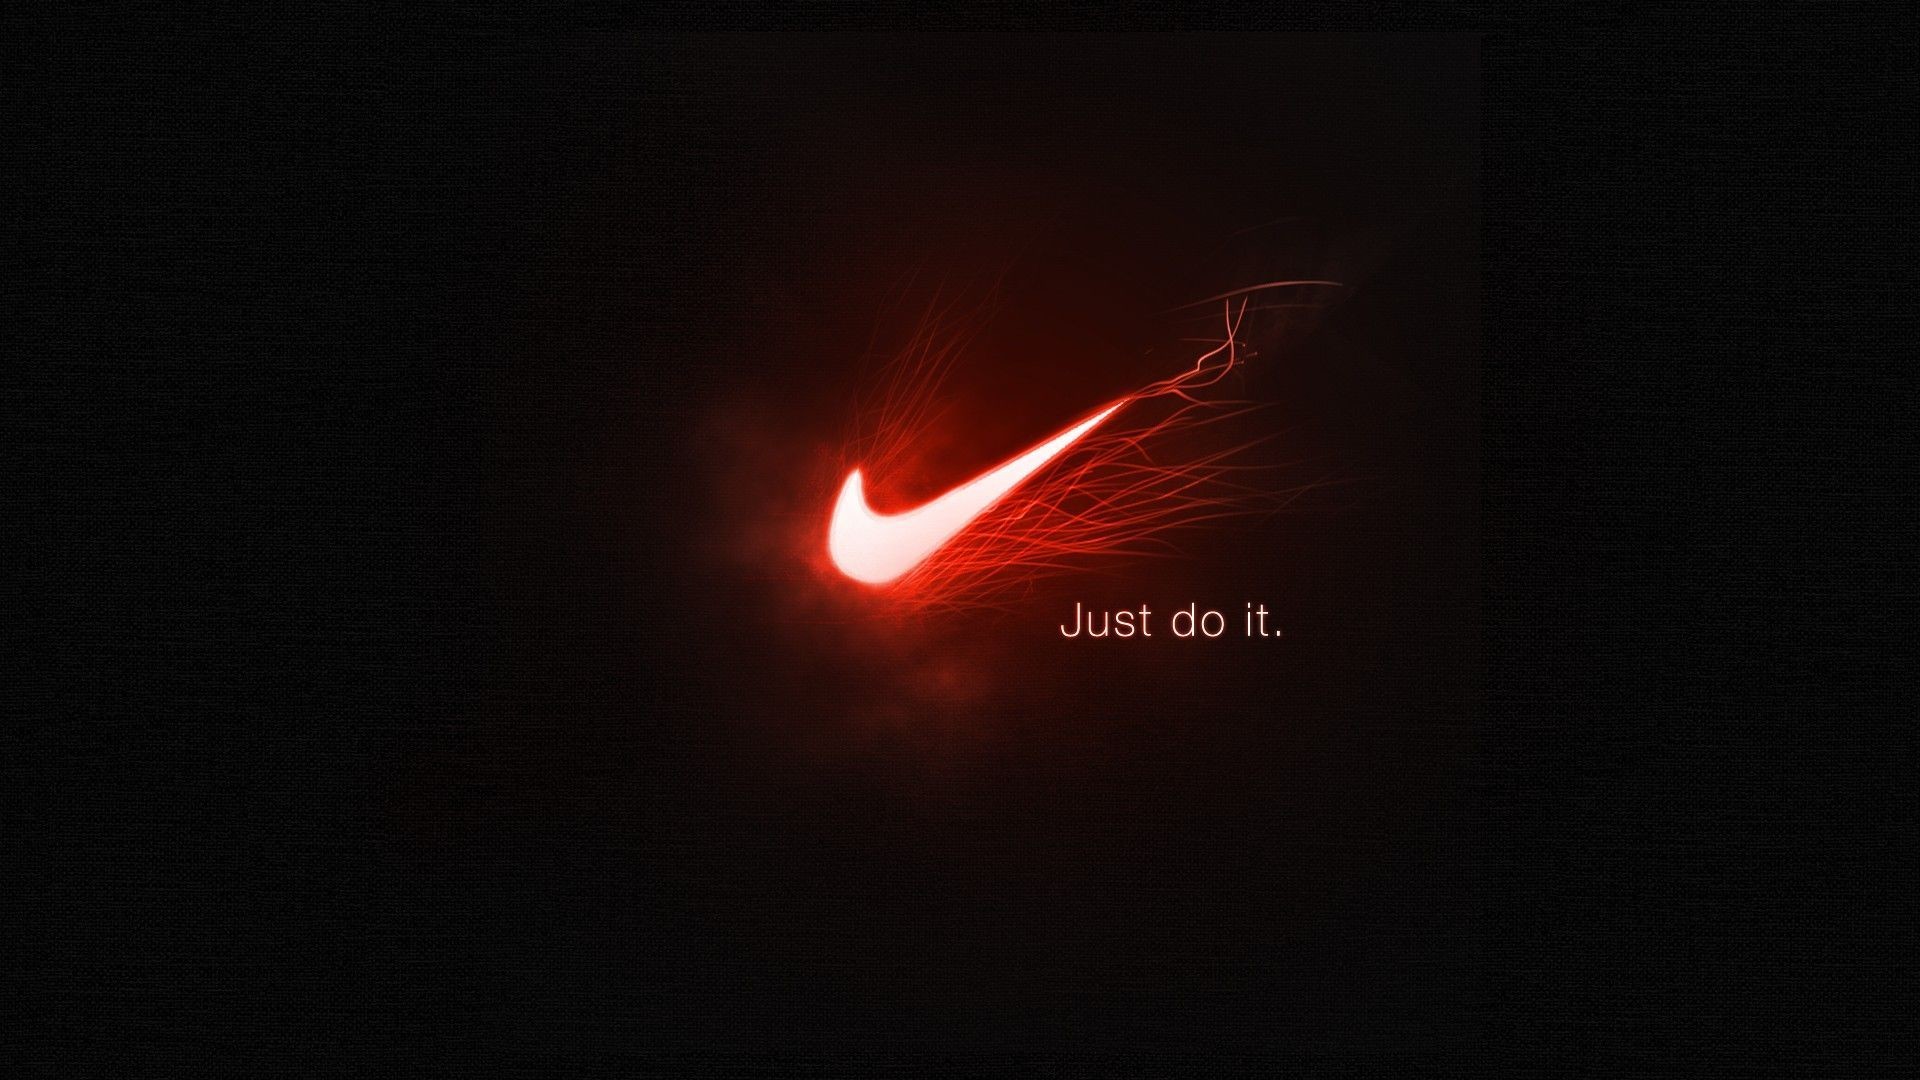 1920x1080 Nike Just Do It Wallpapers High Quality As Wallpaper HD